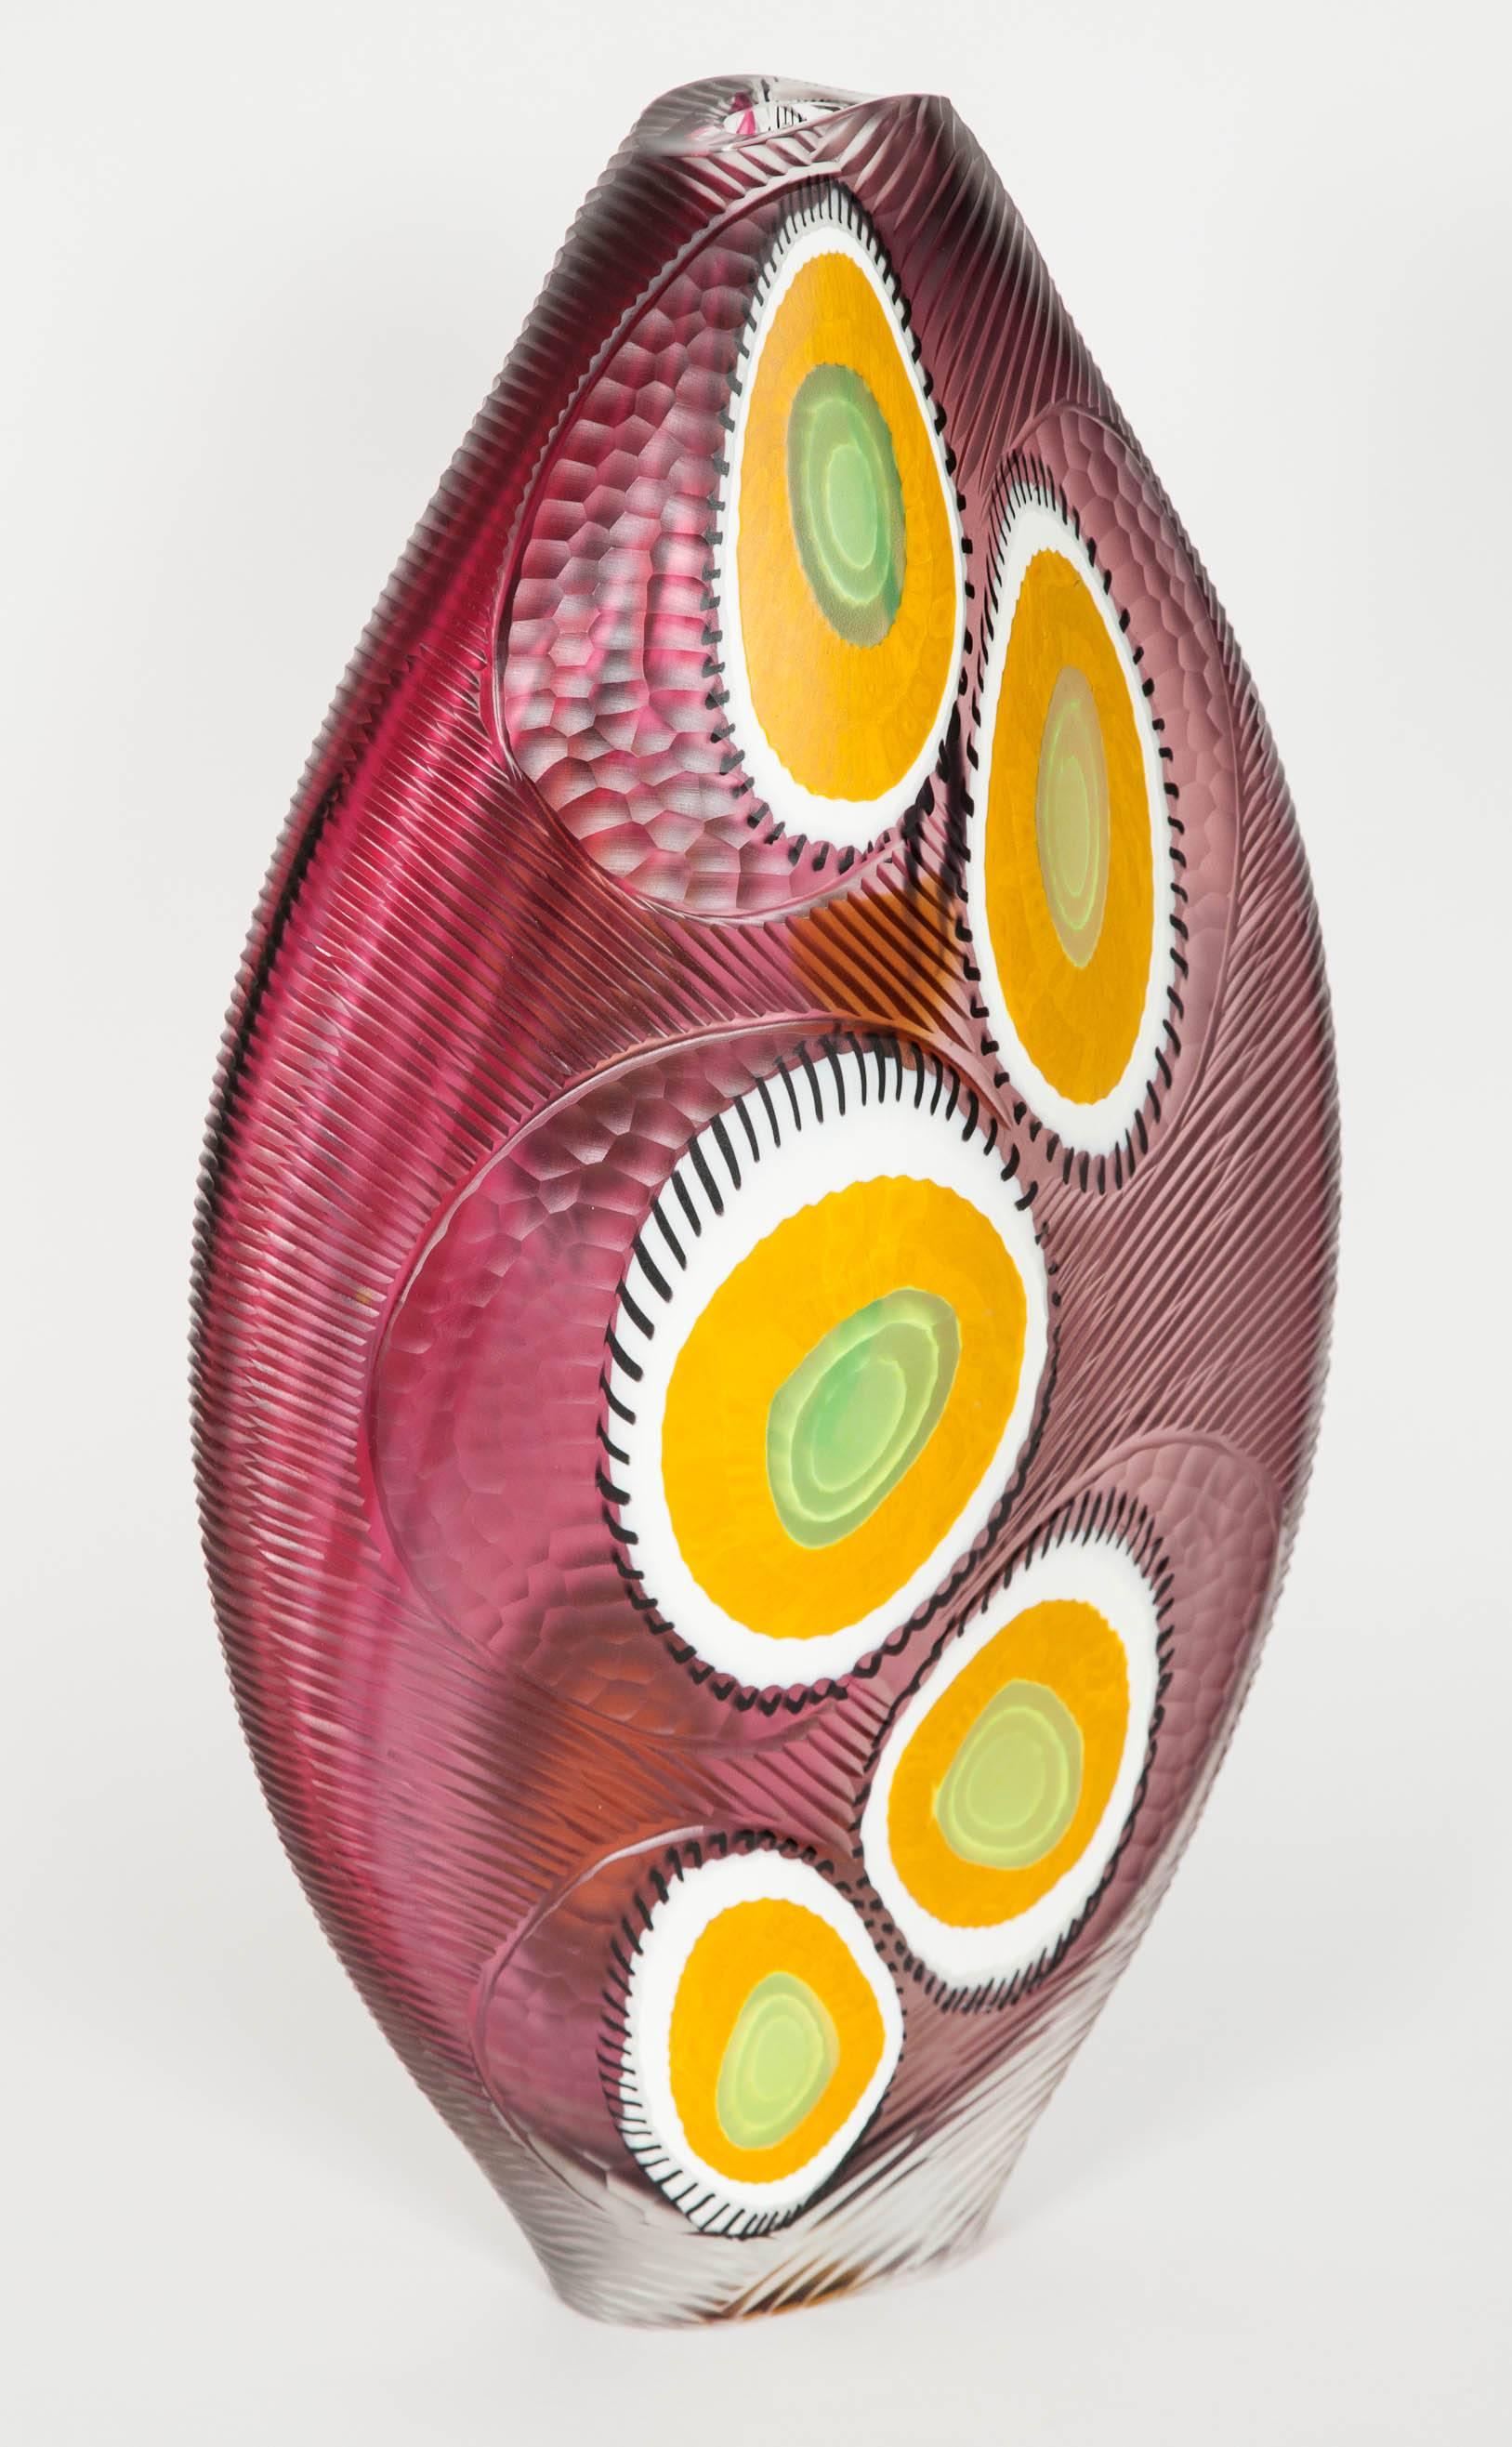 Hand-Crafted Evviva II, a mixed coloured sculptural glass vase by Marco & Mattia Salvadore For Sale